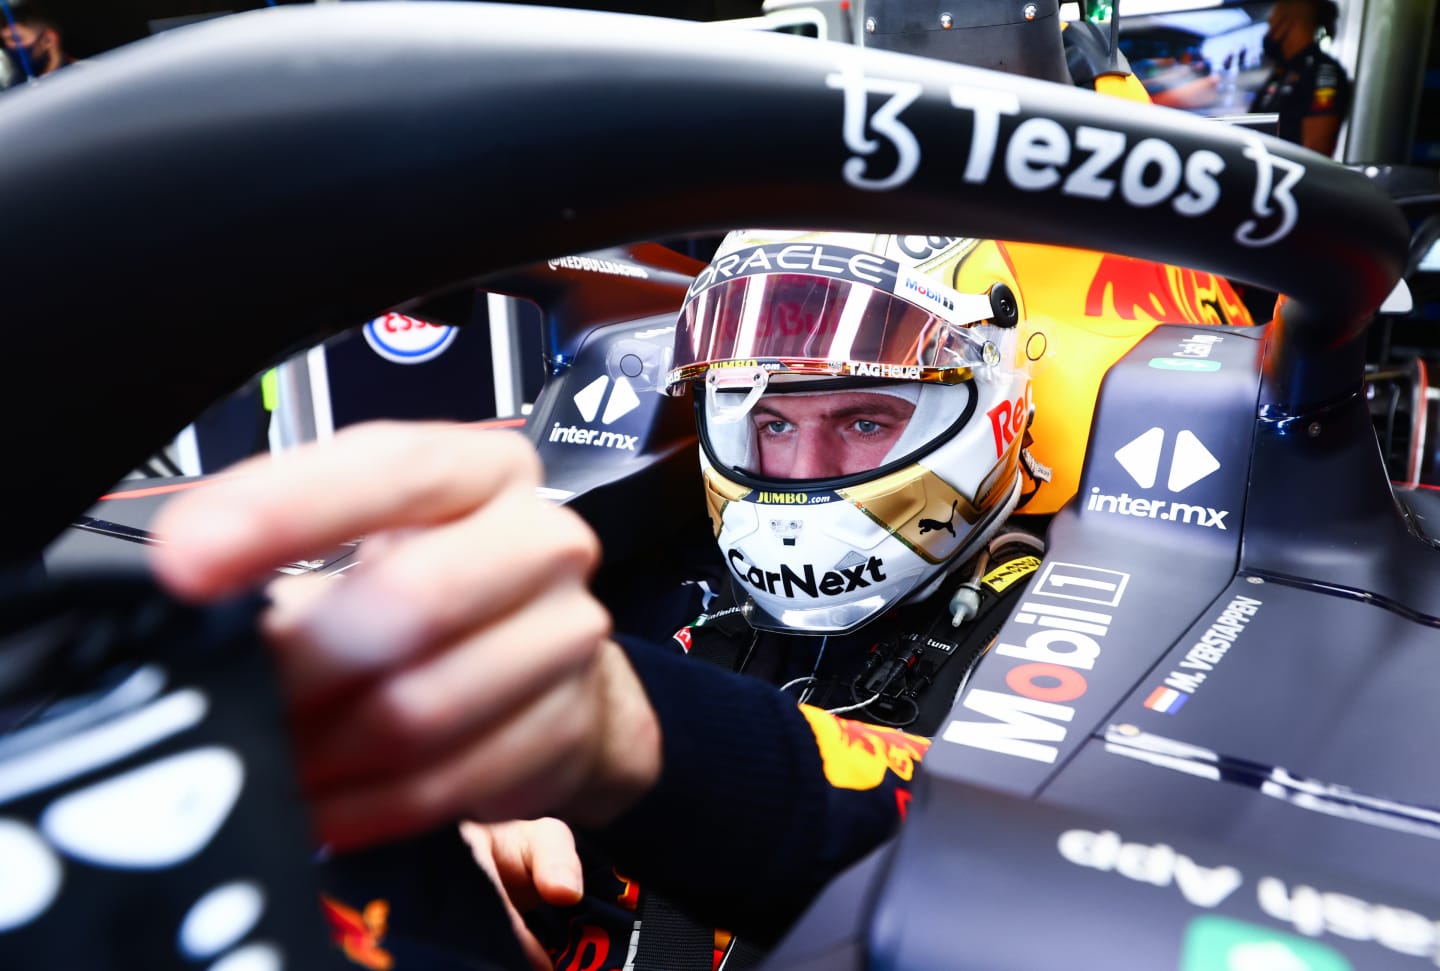 MELBOURNE, AUSTRALIA - APRIL 08: Max Verstappen of the Netherlands and Oracle Red Bull Racing prepares to drive in the garage during practice ahead of the F1 Grand Prix of Australia at Melbourne Grand Prix Circuit on April 08, 2022 in Melbourne, Australia. (Photo by Mark Thompson/Getty Images)